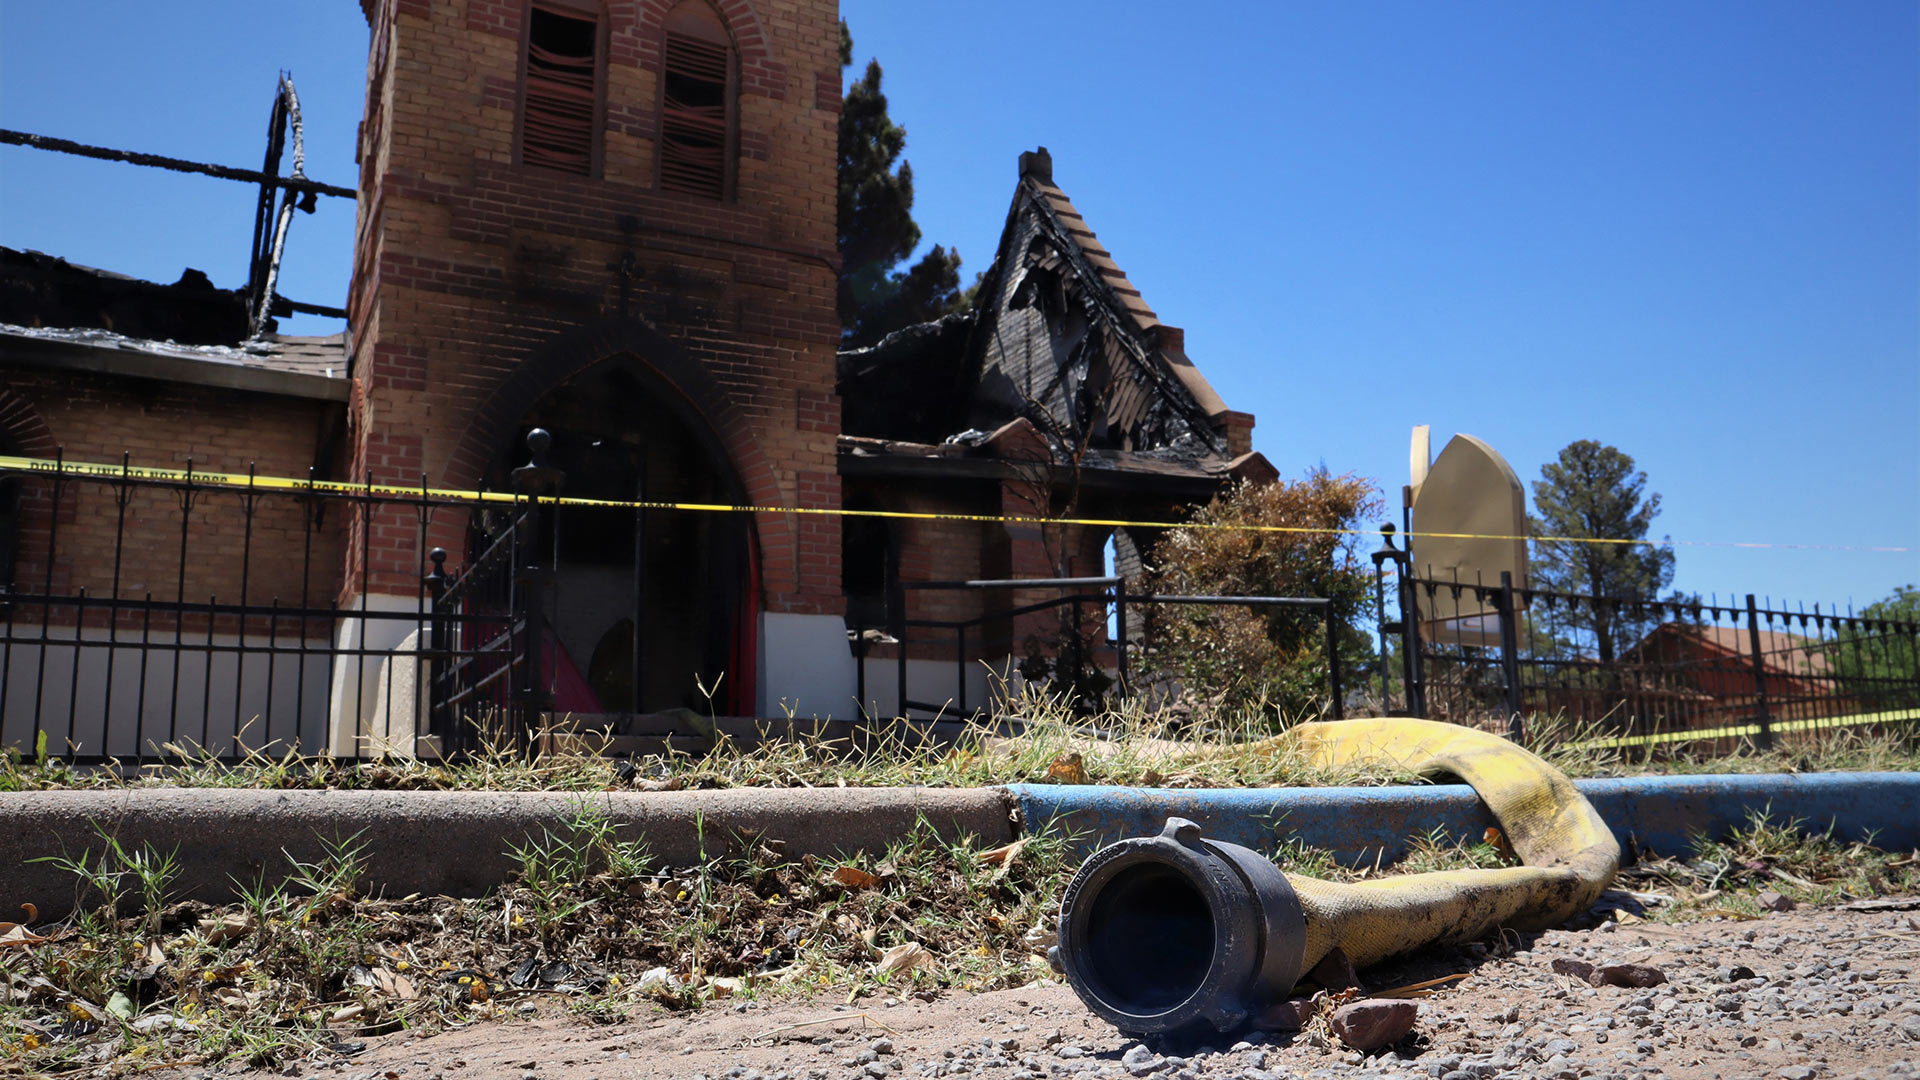 St. Stephen's Episcopal Church was extensively damaged by a fire that authorities say was intentionally started Monday.